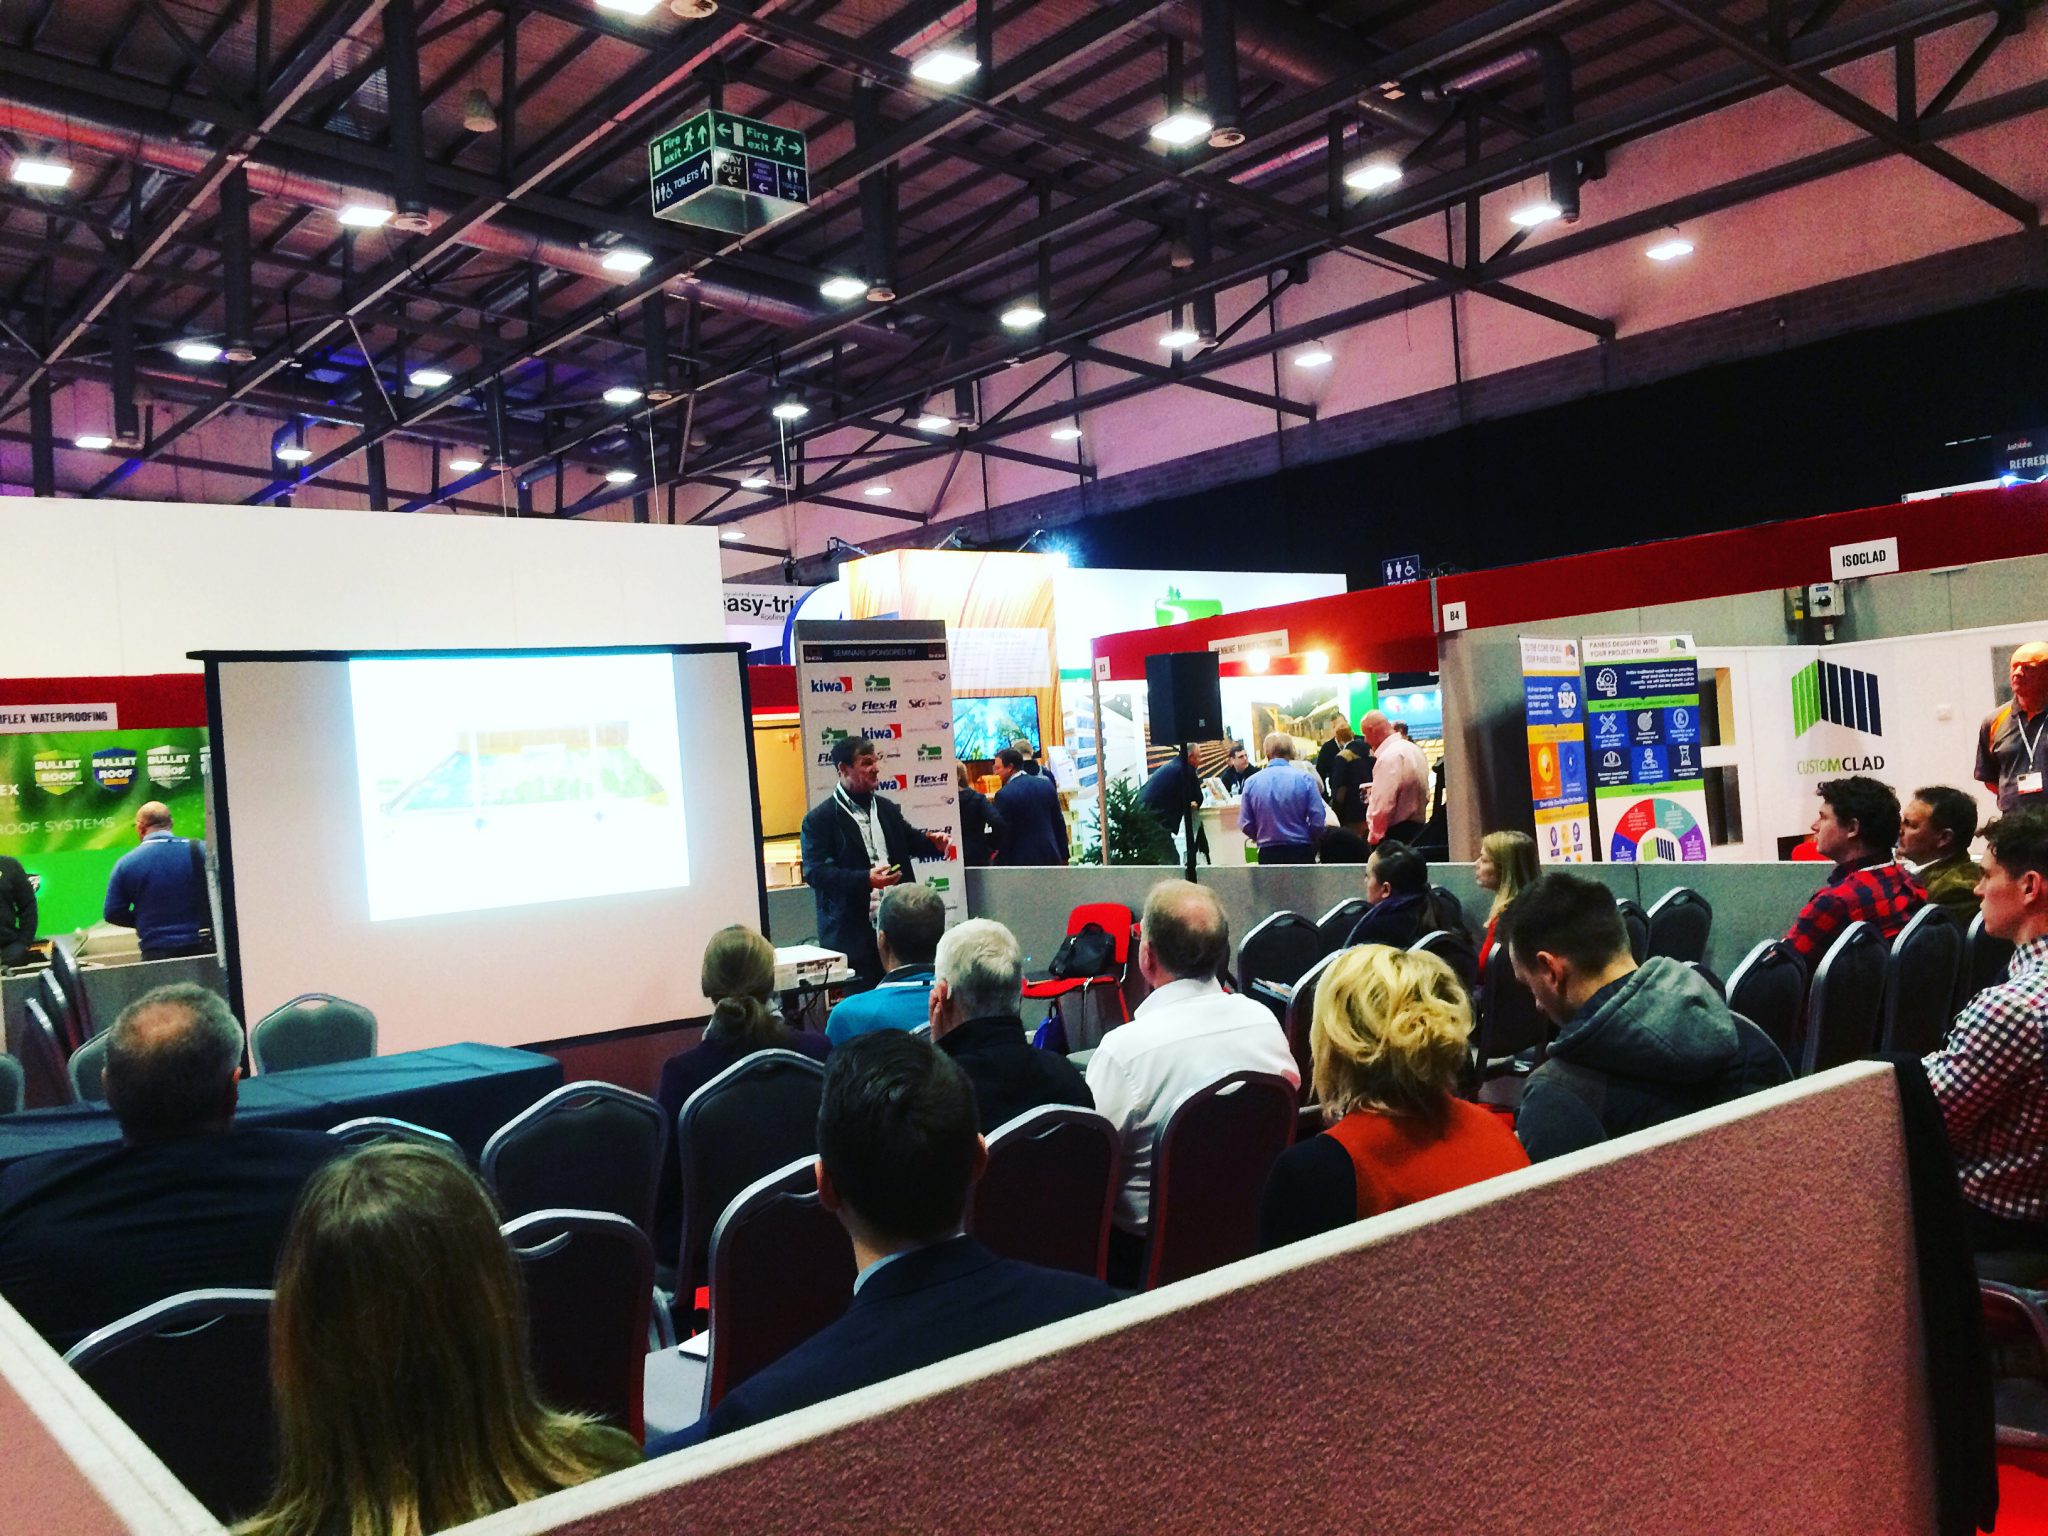 Roofing Cladding & Insulation Show returns in 2019